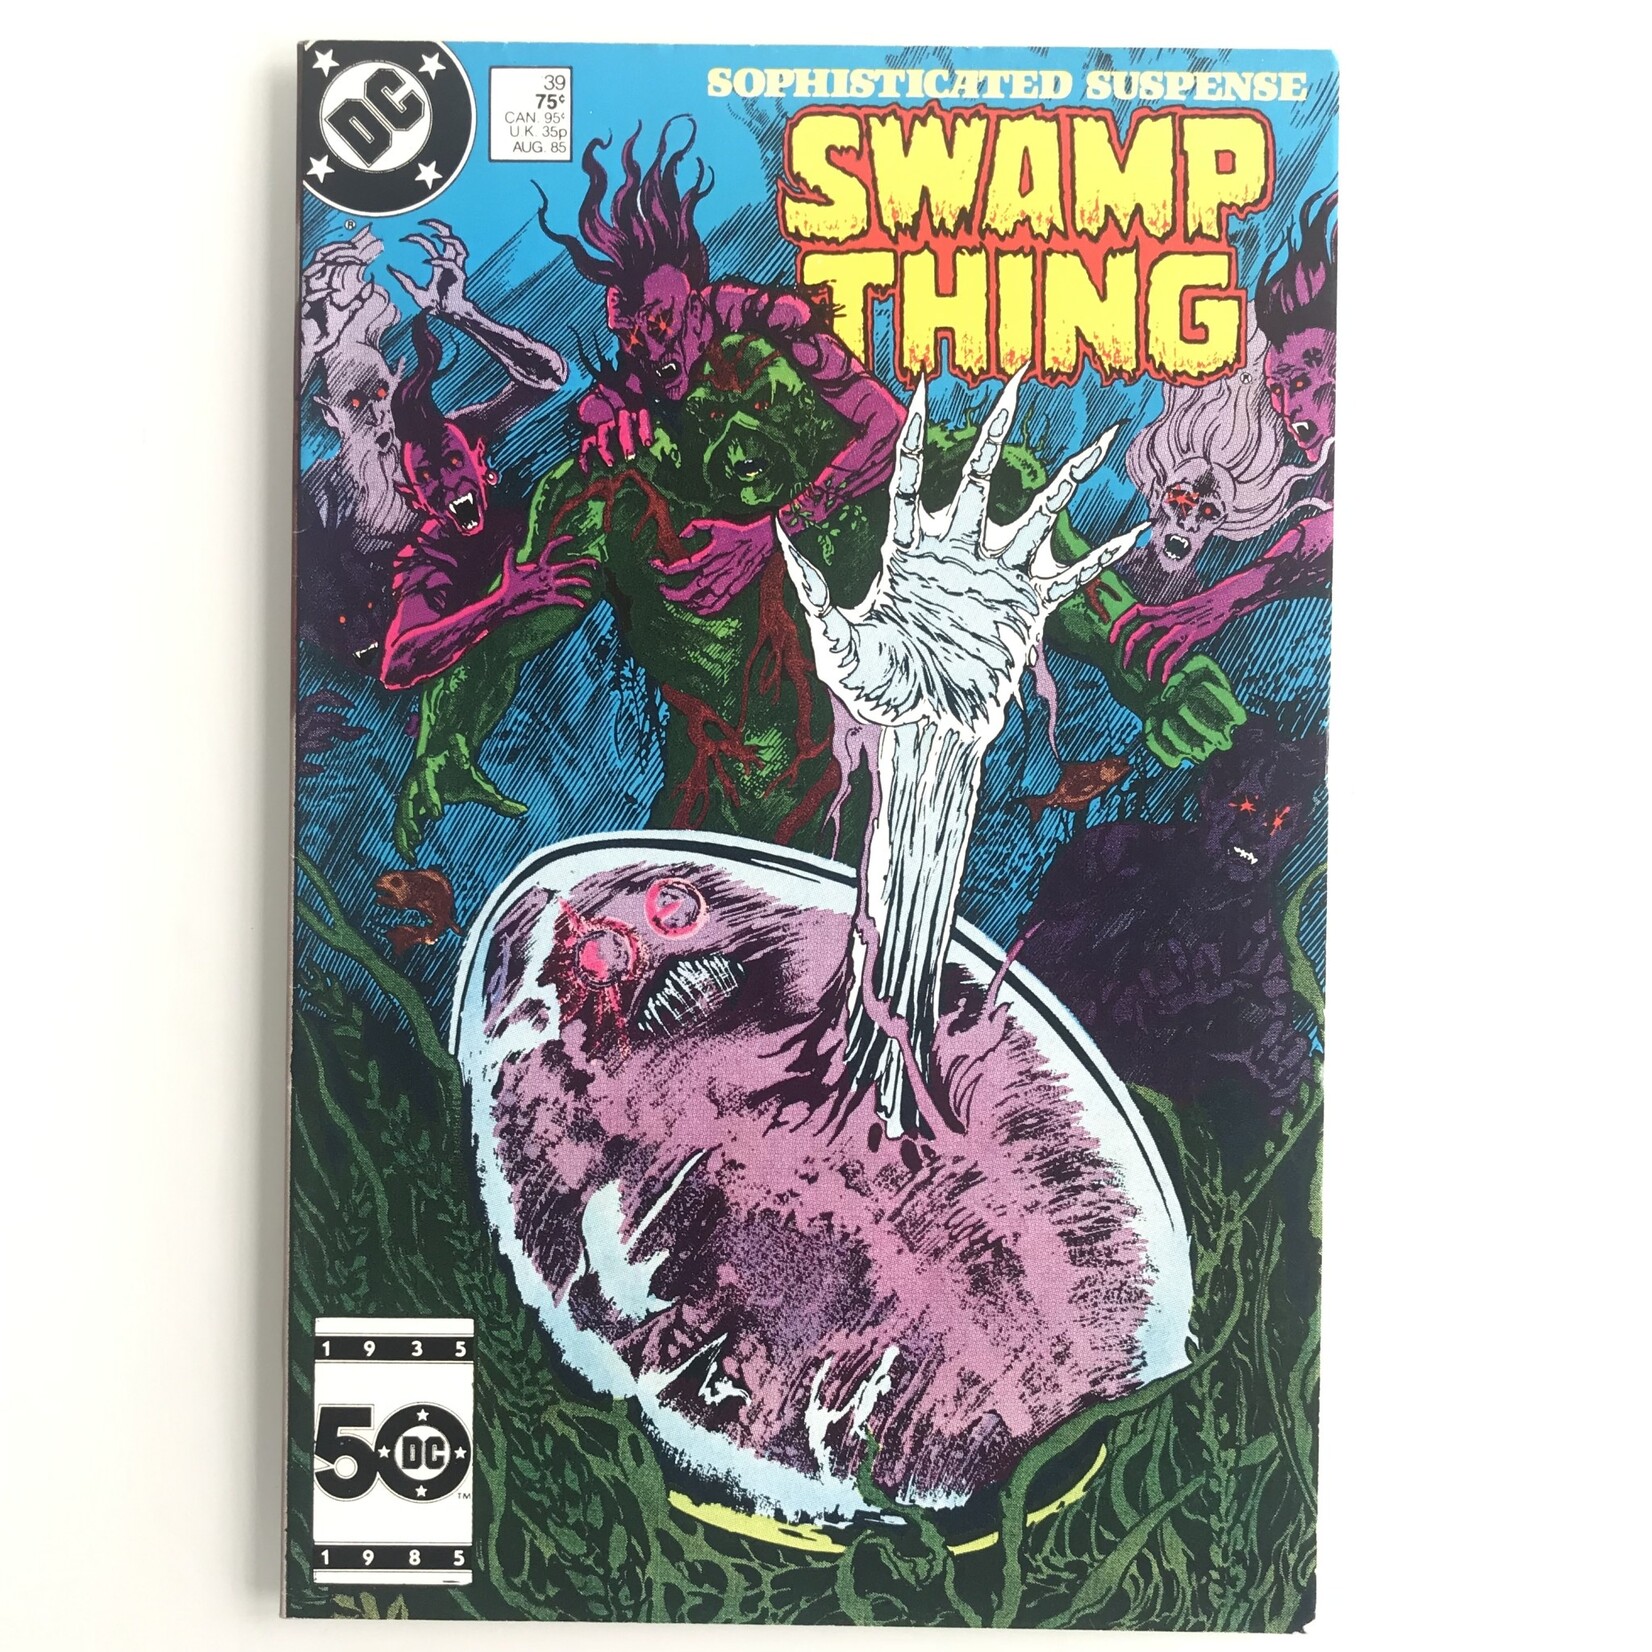 Swamp Thing - Vol. 2 #39 August 1985 - Comic Book